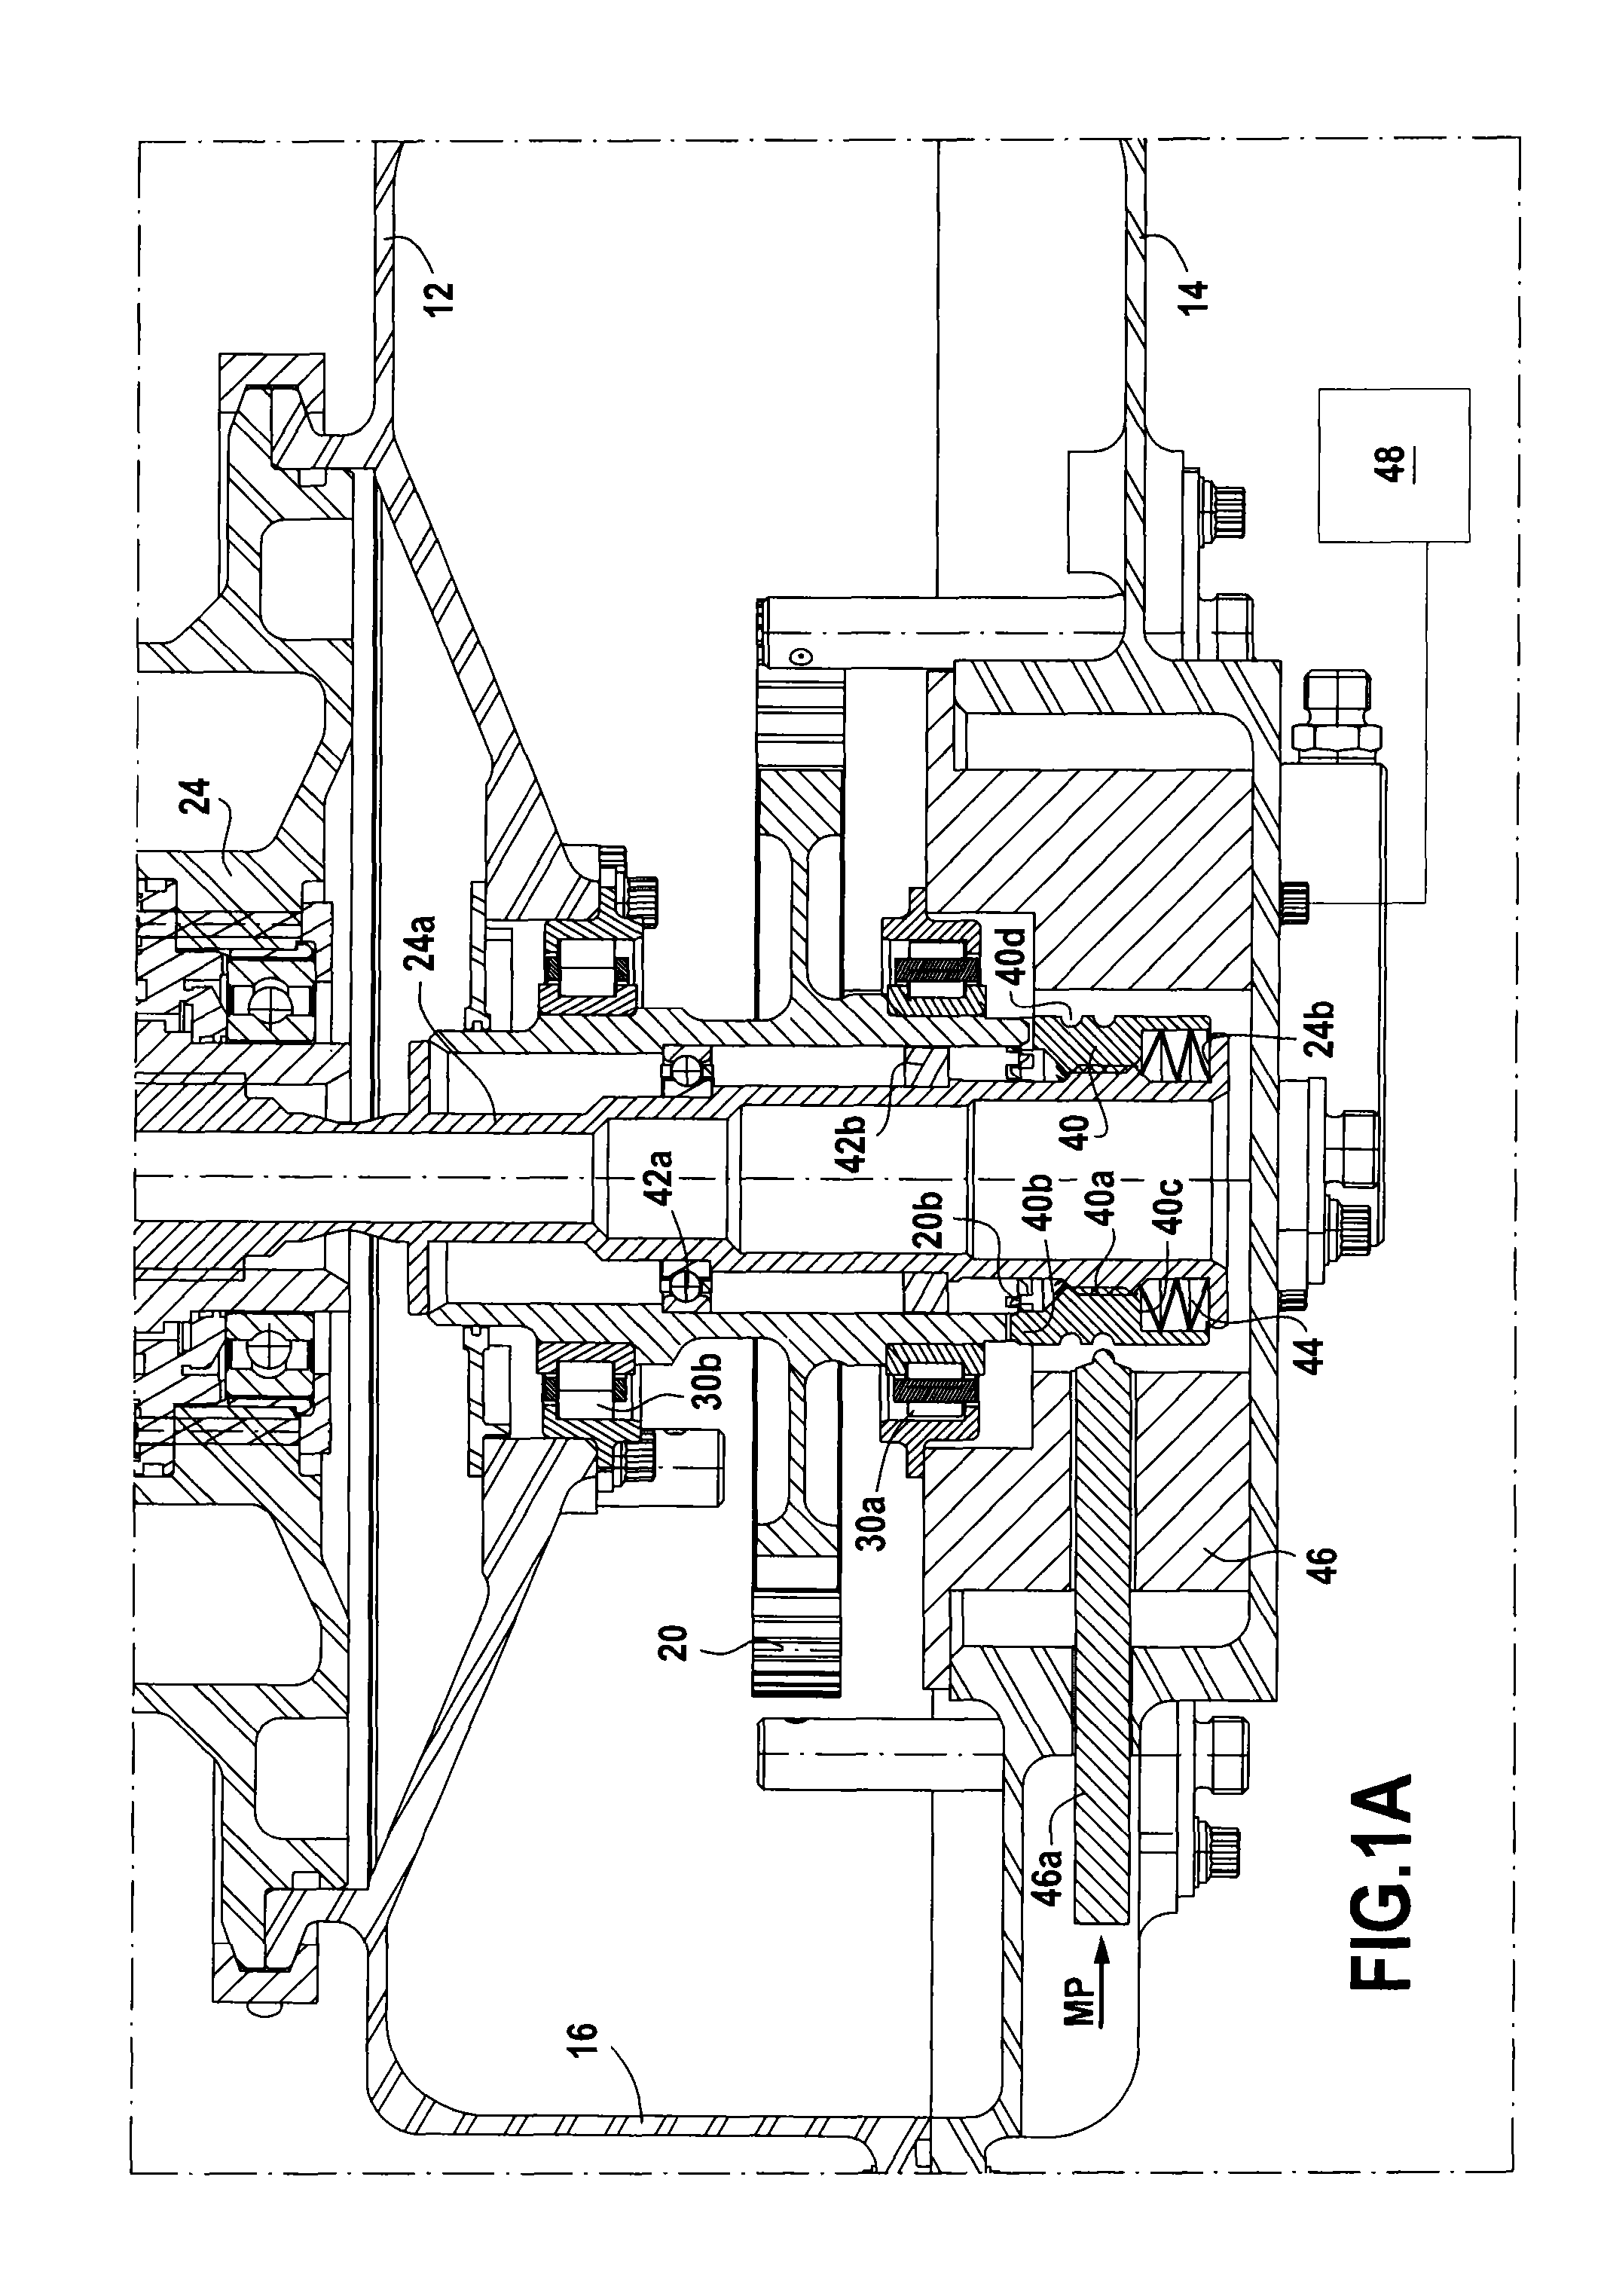 Gas turbine accessory gearbox incorporating decoupling means